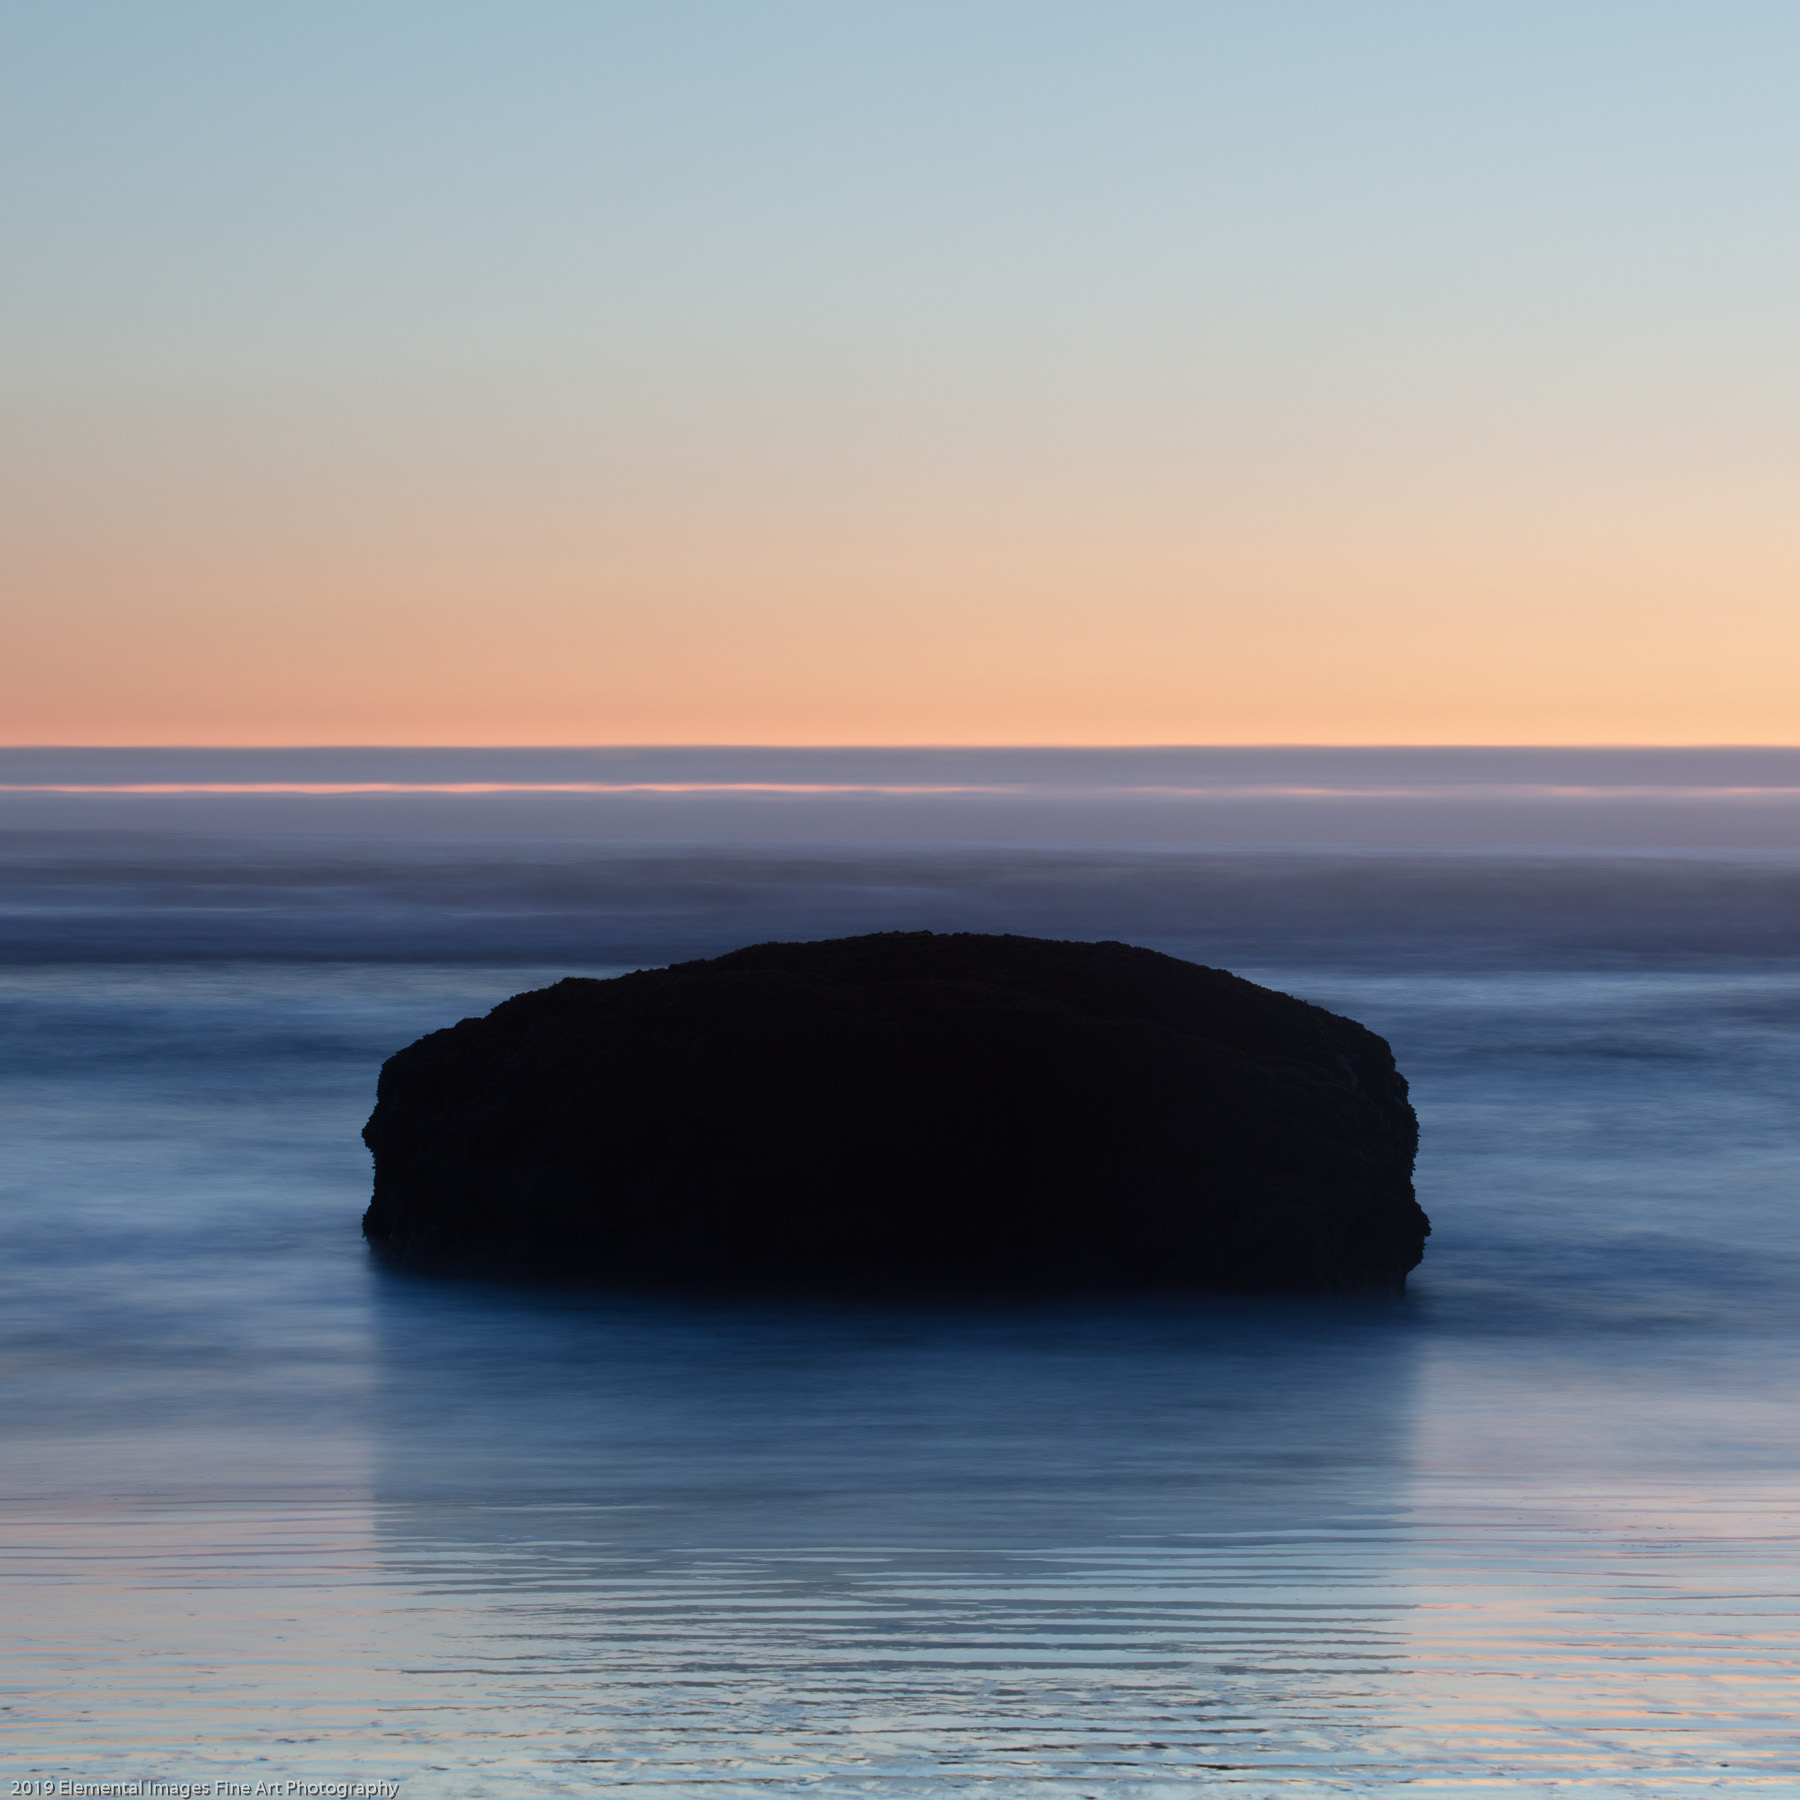 Zen Rocks #17 | Bandon | OR | USA - © 2019 Elemental Images Fine Art Photography - All Rights Reserved Worldwide